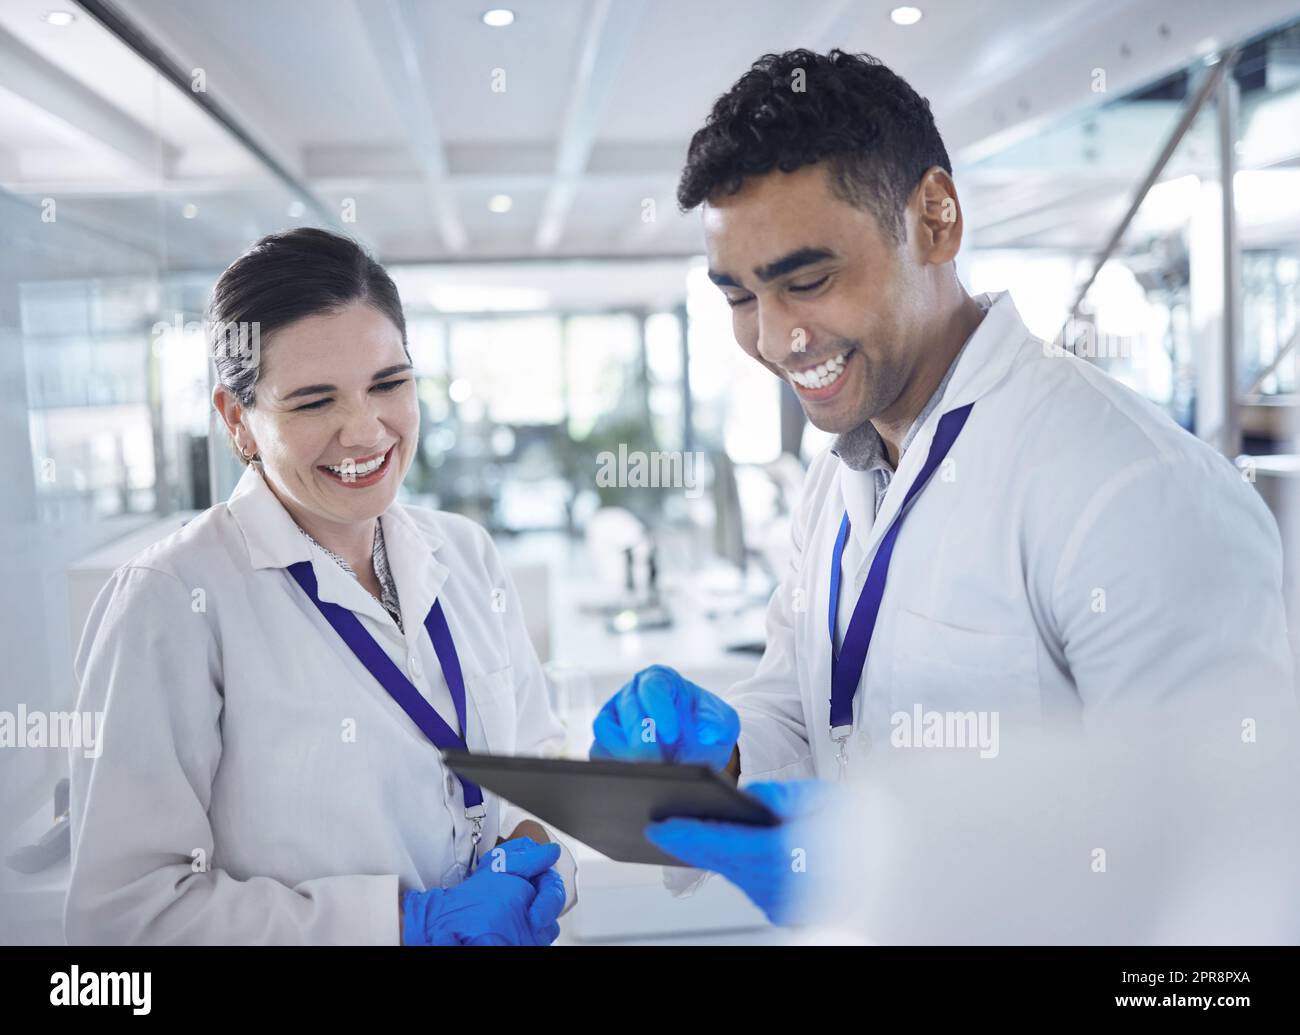 Two happy and cheerful scientists laughing and using a digital tablet while working together in a lab. Mixed race man and caucasian woman checking social media and smiling together. Stock Photo